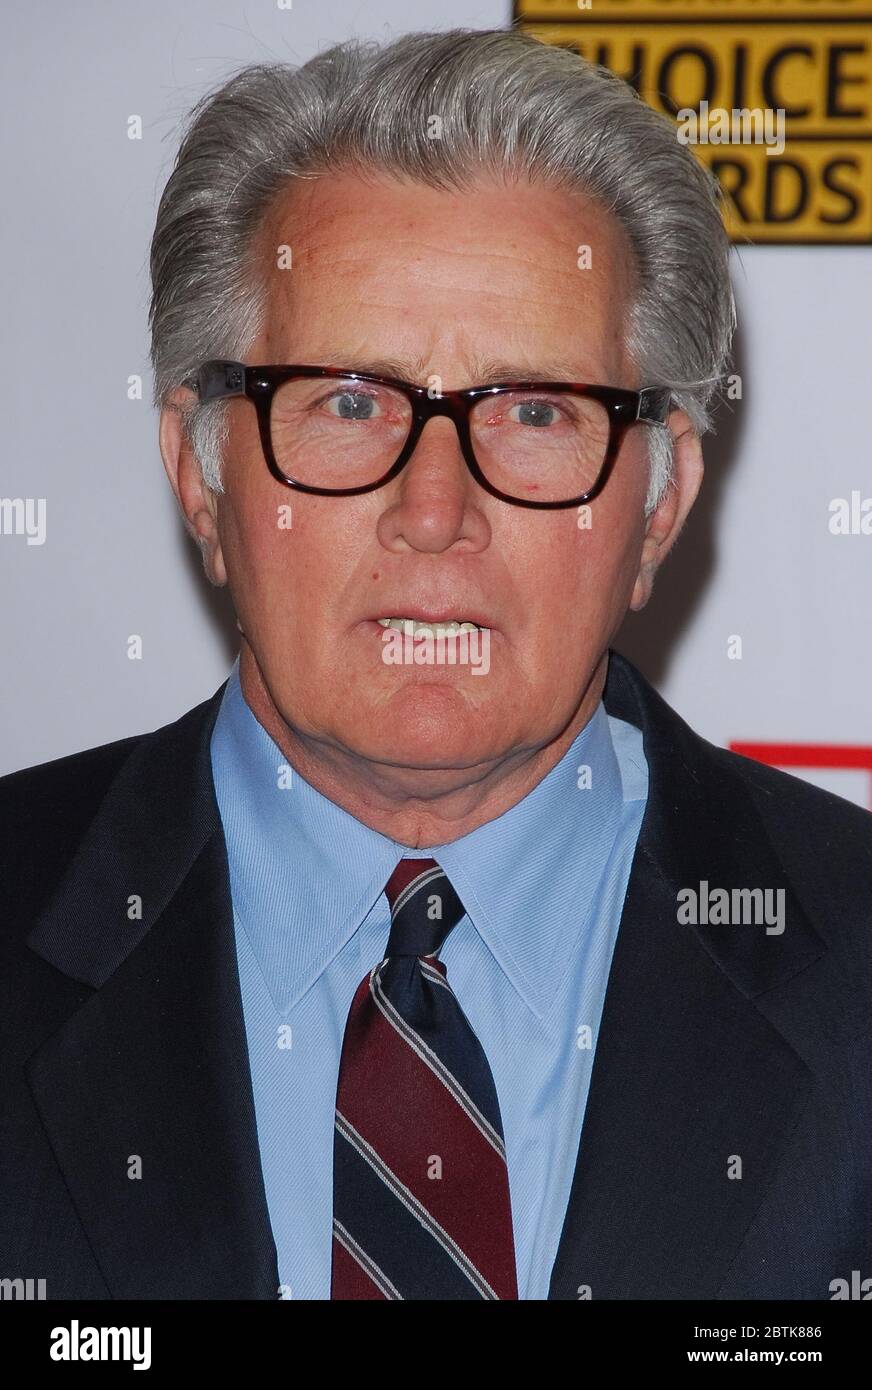 Martin Sheen at the 12th Annual Critics' Choice Awards held at the Santa Monica Civic Auditorium in Santa Monica, CA. The event took place on Friday, January 12, 2007.  Photo by: SBM / PictureLux - File Reference # 34006-552SBMPLX Stock Photo